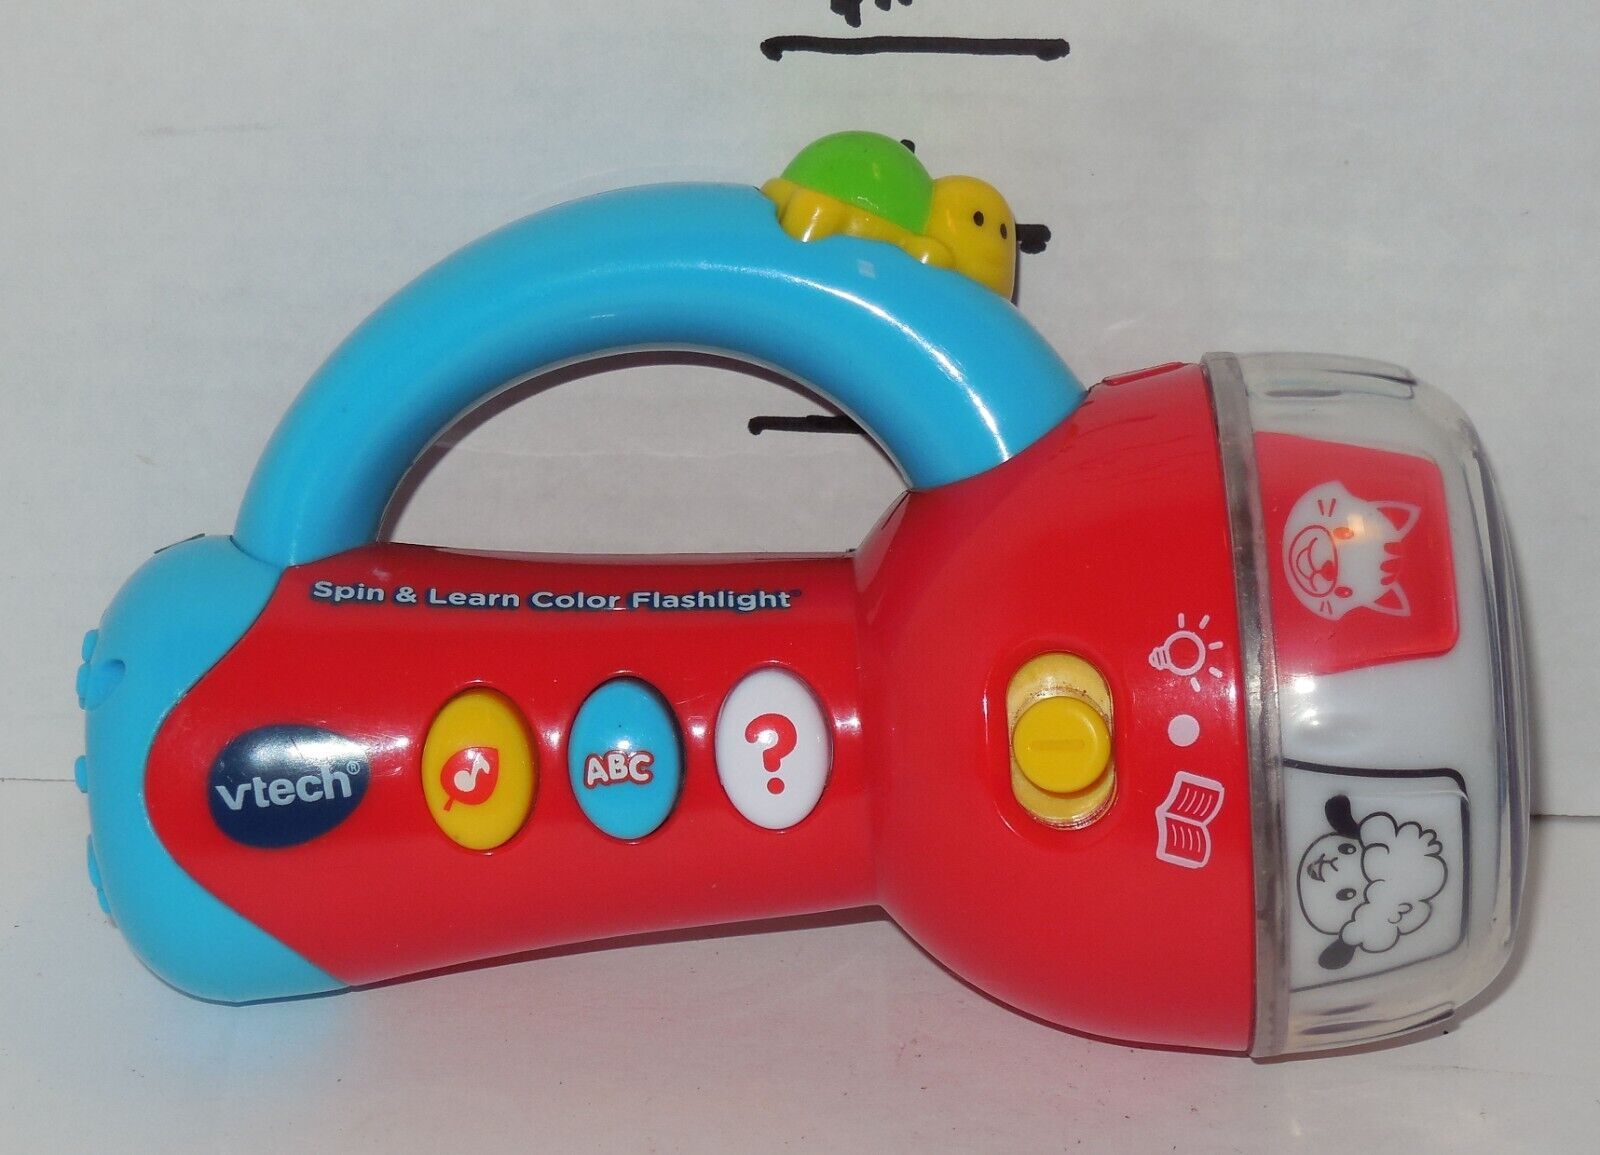 VTech Spin and Learn Color Flashlight Educational Electronic Learning Toy Red - $9.60